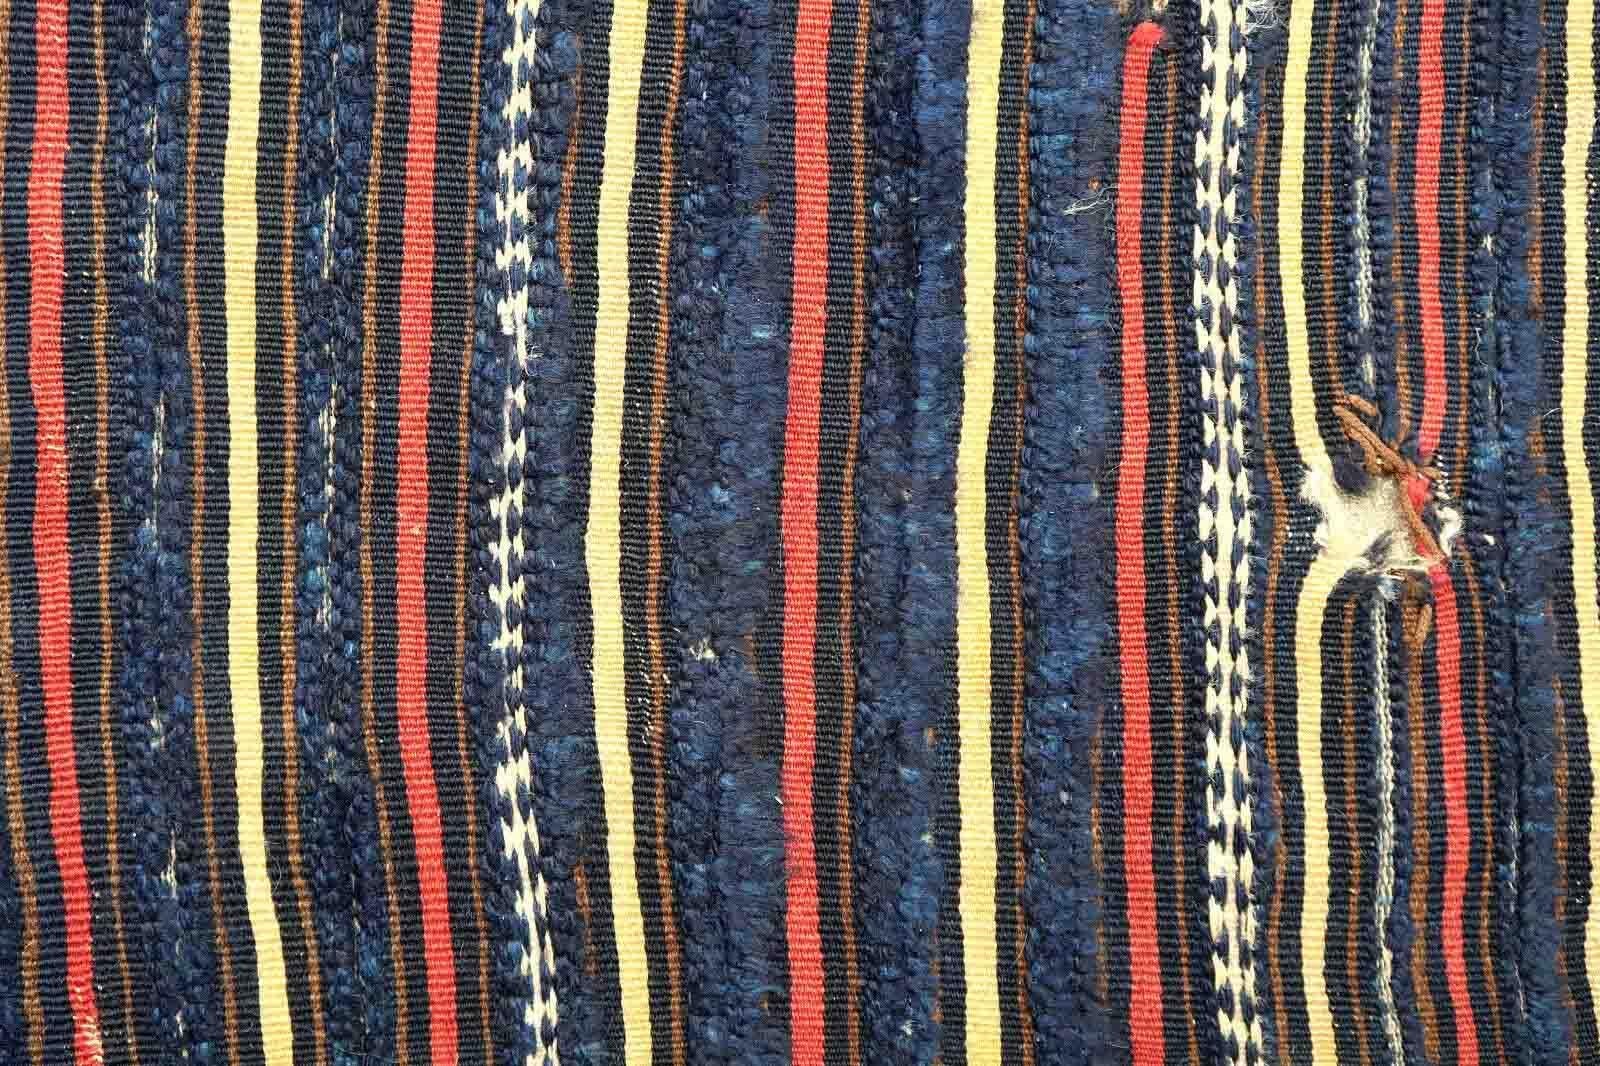 Handmade antique Berber handira from Morocco, Outat El Haj region.
This piece is from the end of 19th century in original condition, it has some holes and wears. The kilim is collectible and made in wool.

-condition: original, some age wear,